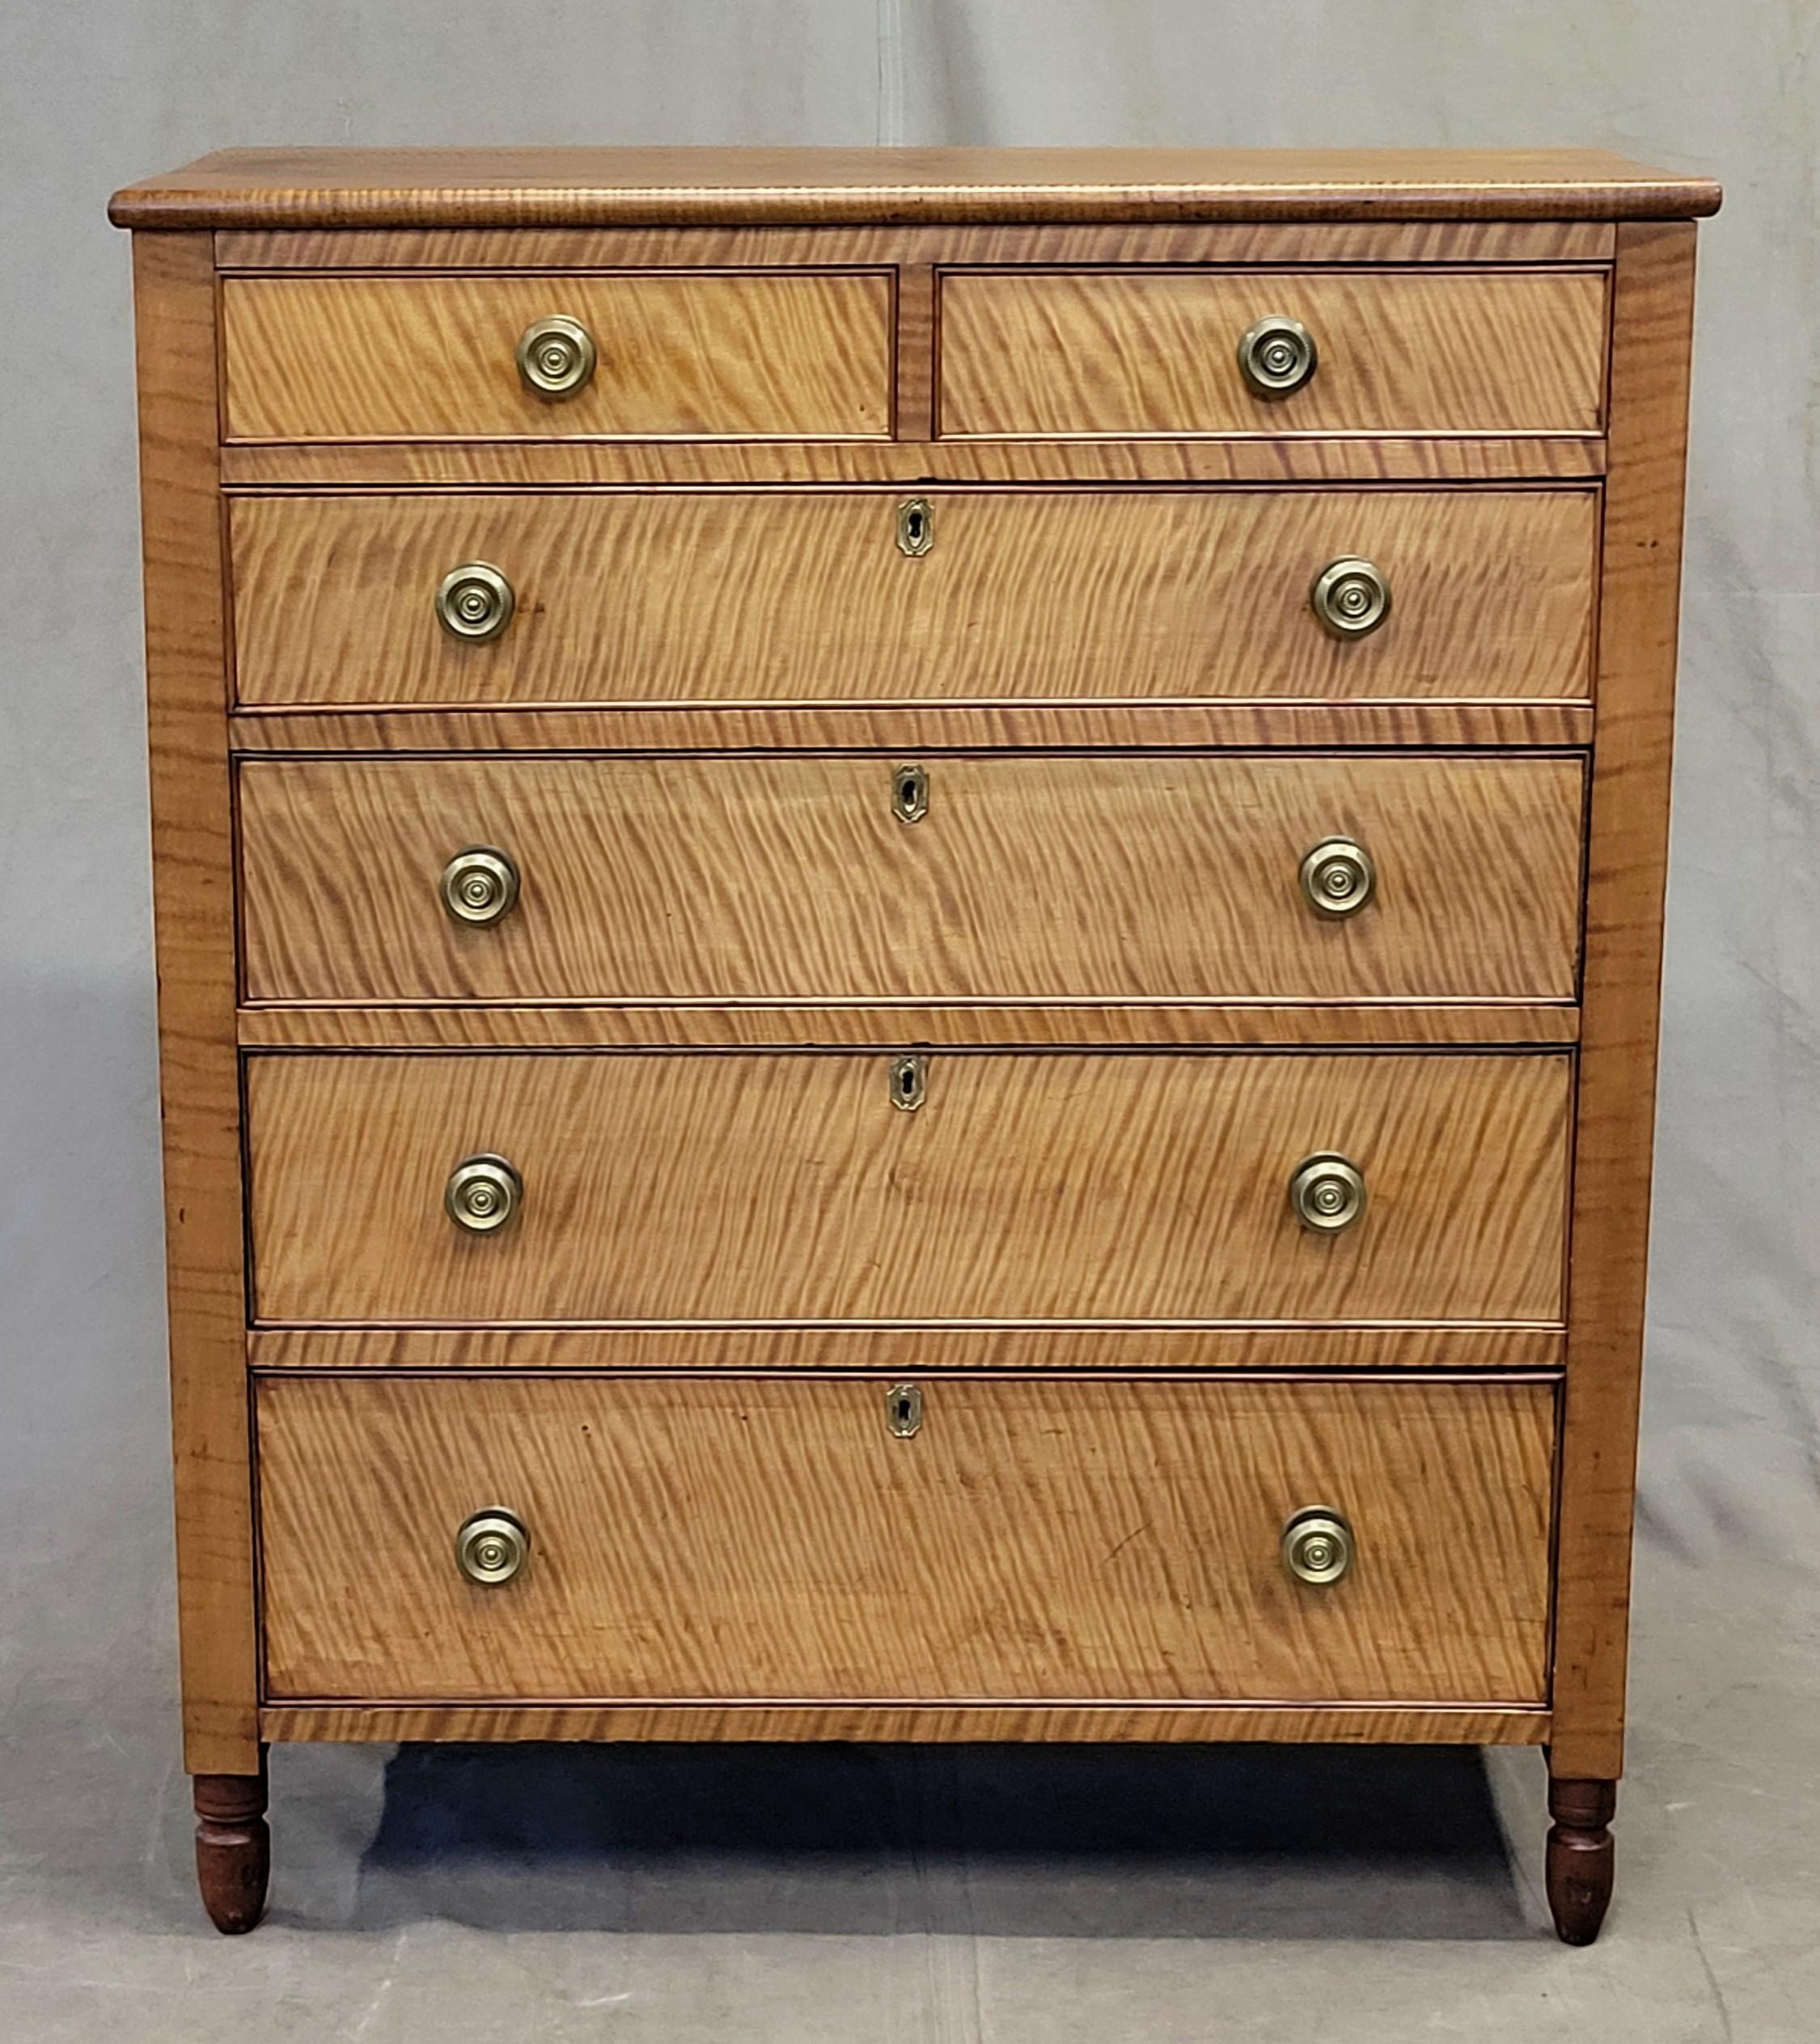 An absolutely stunning antique American Sheraton (1820s or 1830s) tiger maple chest of drawers dresser with original brass hardware. Drawers are tiger maple trimmed in mahogany and dresser framework is cherry. Gorgeous woodgrain while offering a